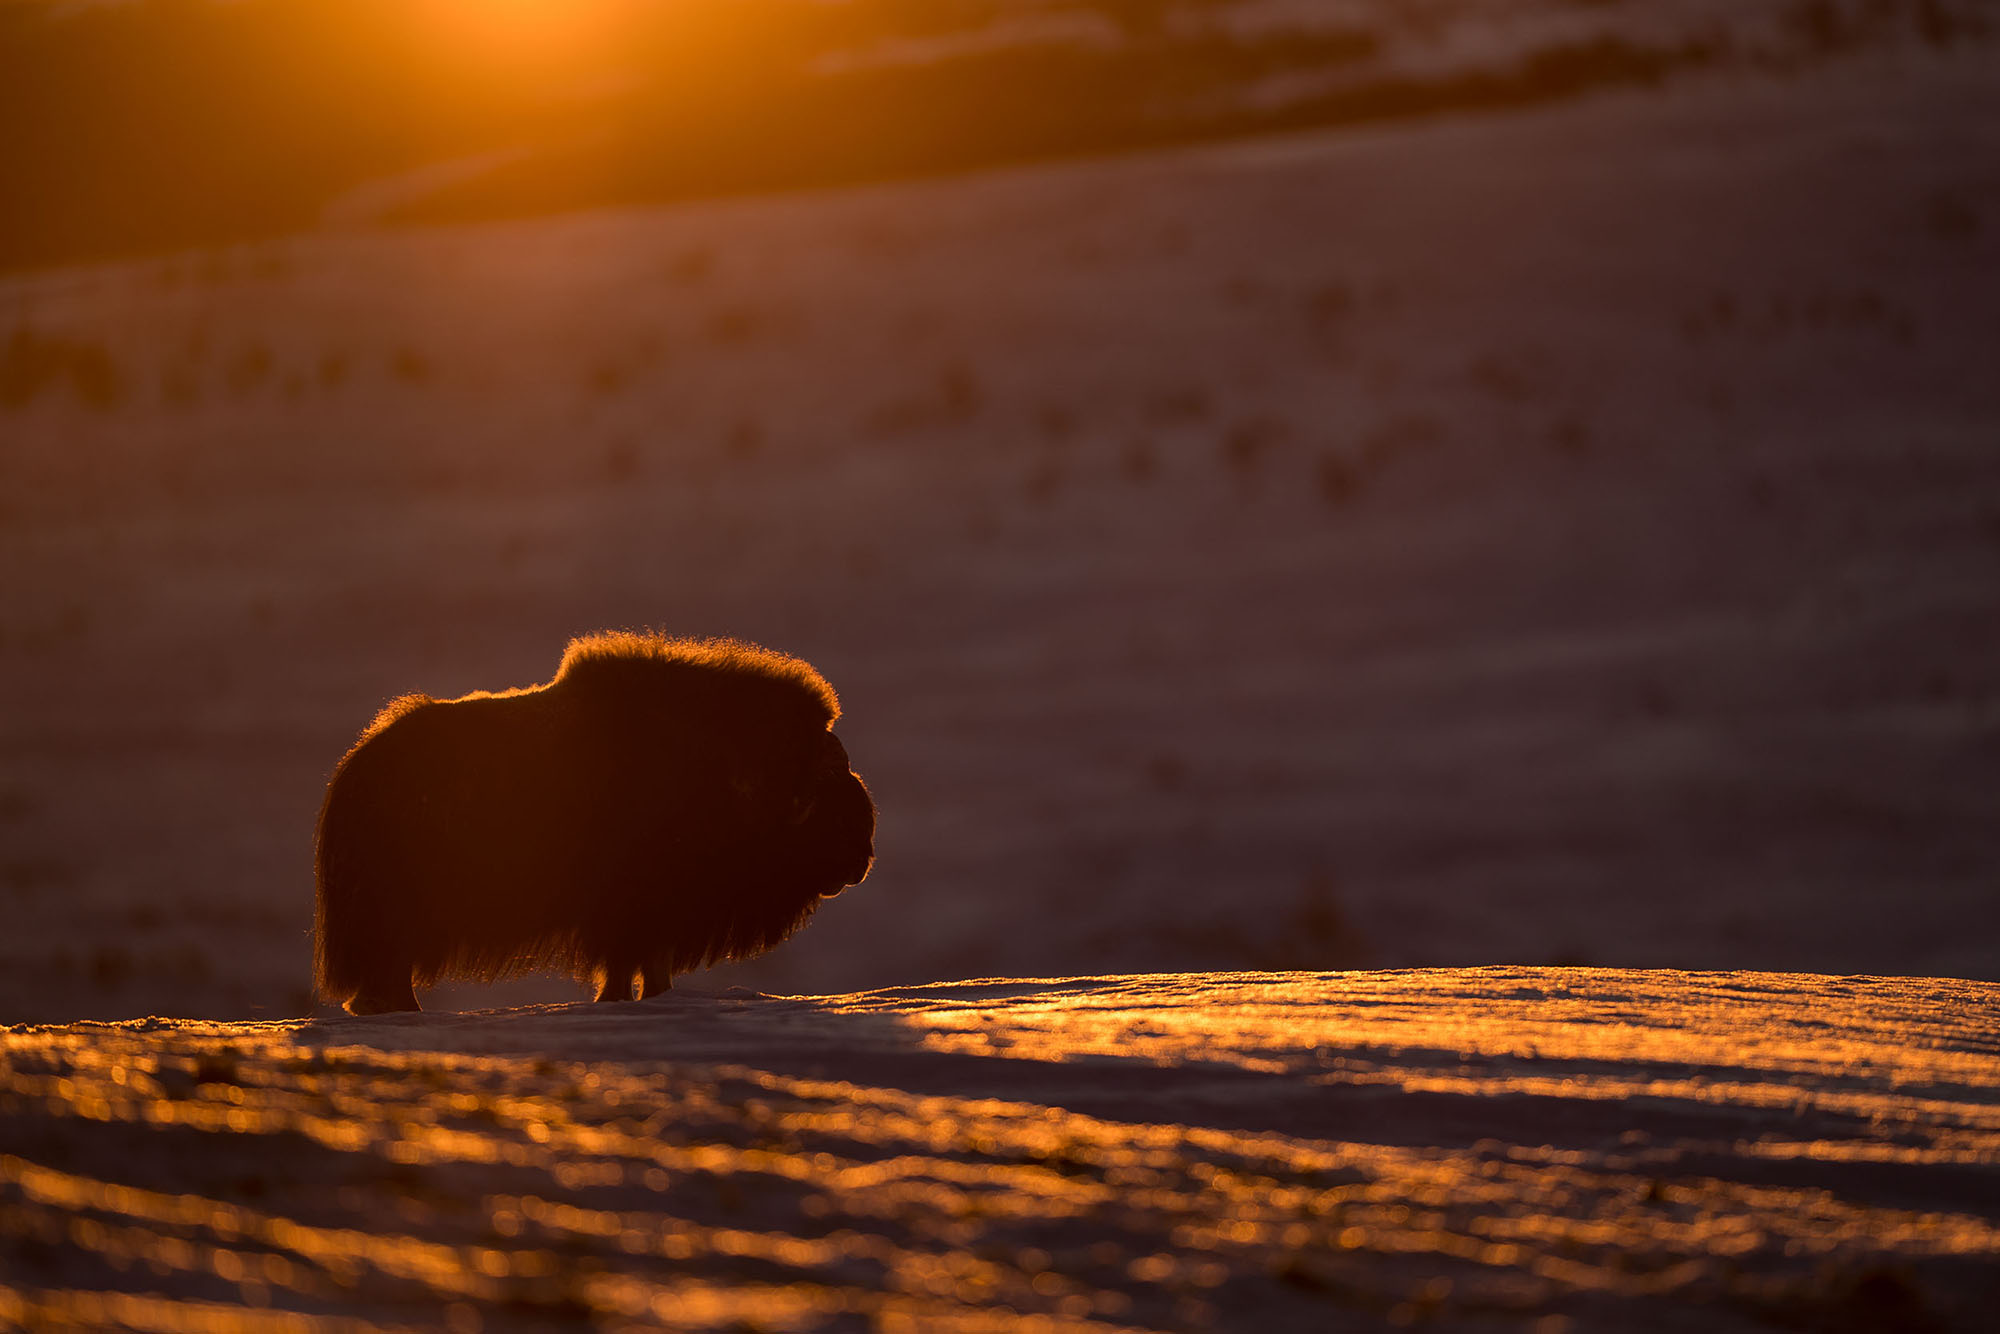 Musk-oxen in winter at Dovrefjell, Norway. Photo tour with Wild Nature Photo Adventures. Photo by Floris Smeets